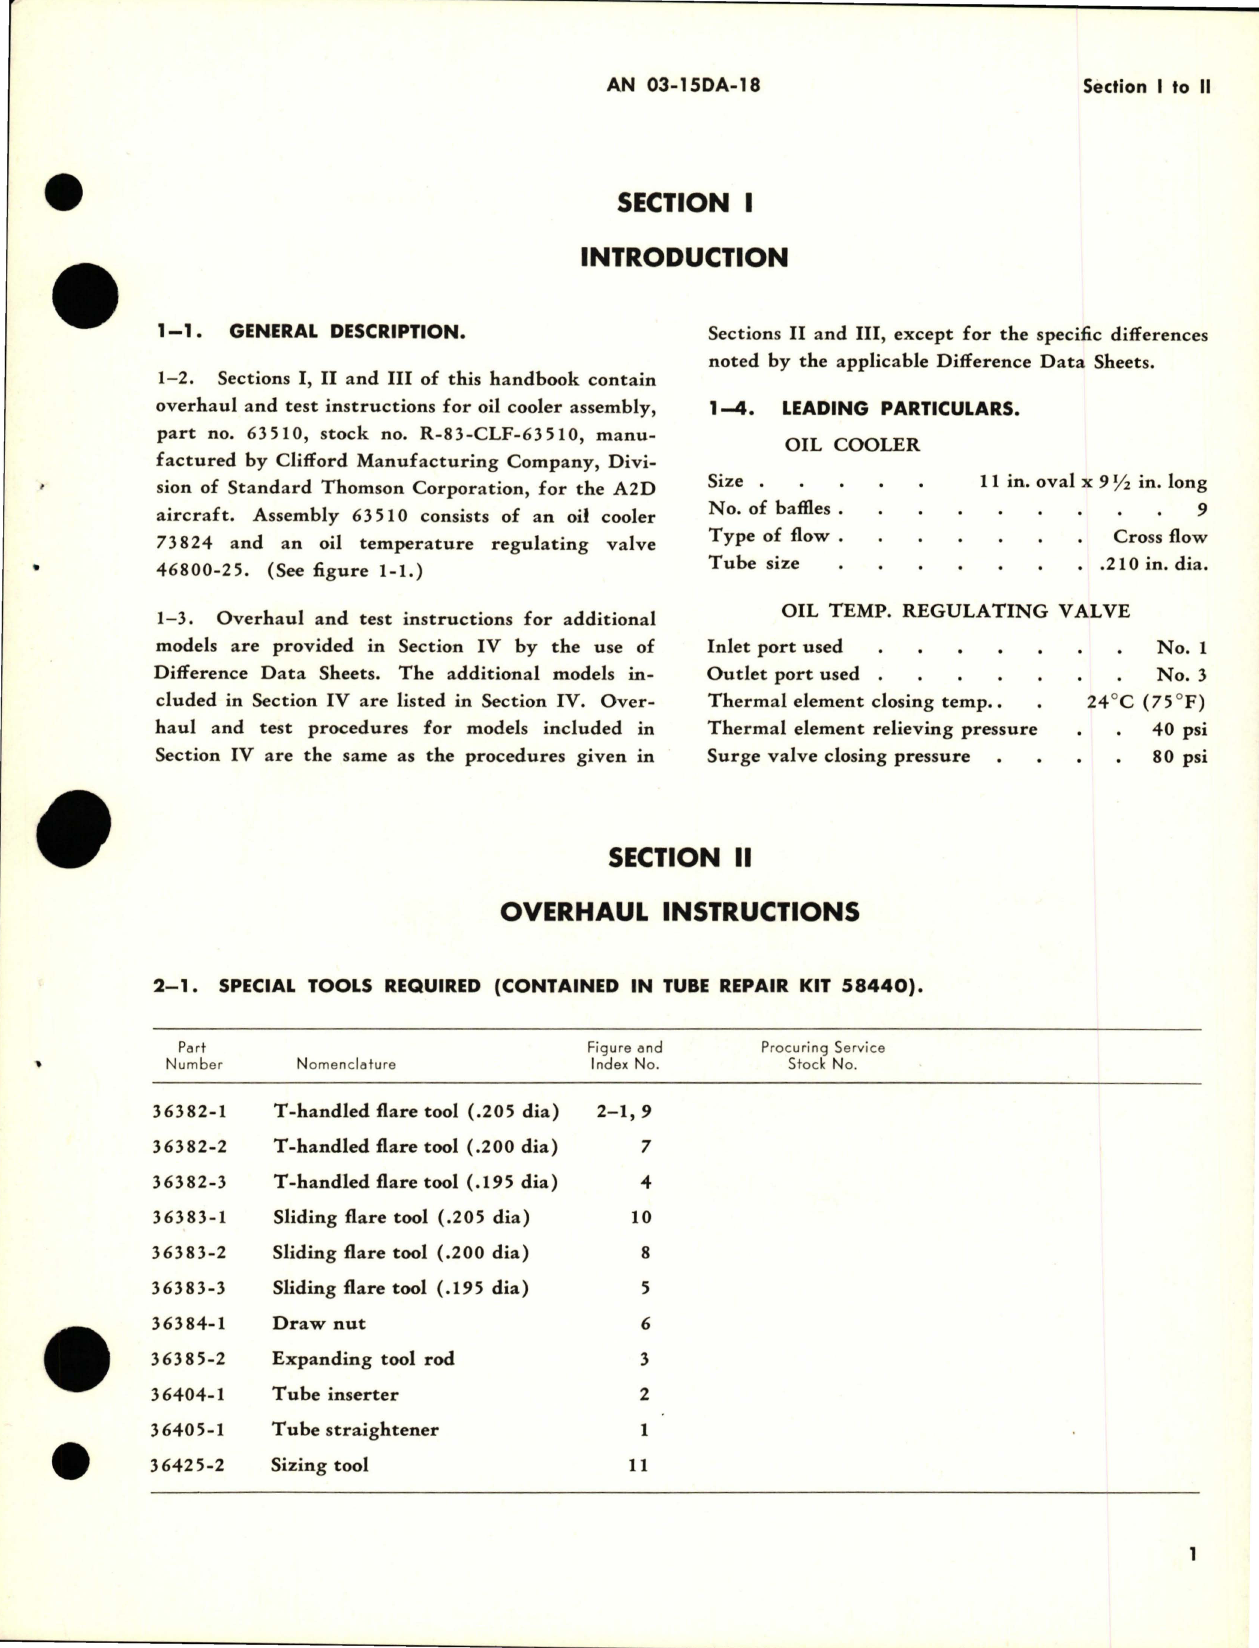 Sample page 5 from AirCorps Library document: Overhaul Instructions for Oil Cooler Assemblies - Parts 63510, 63510-1 and 63510-2